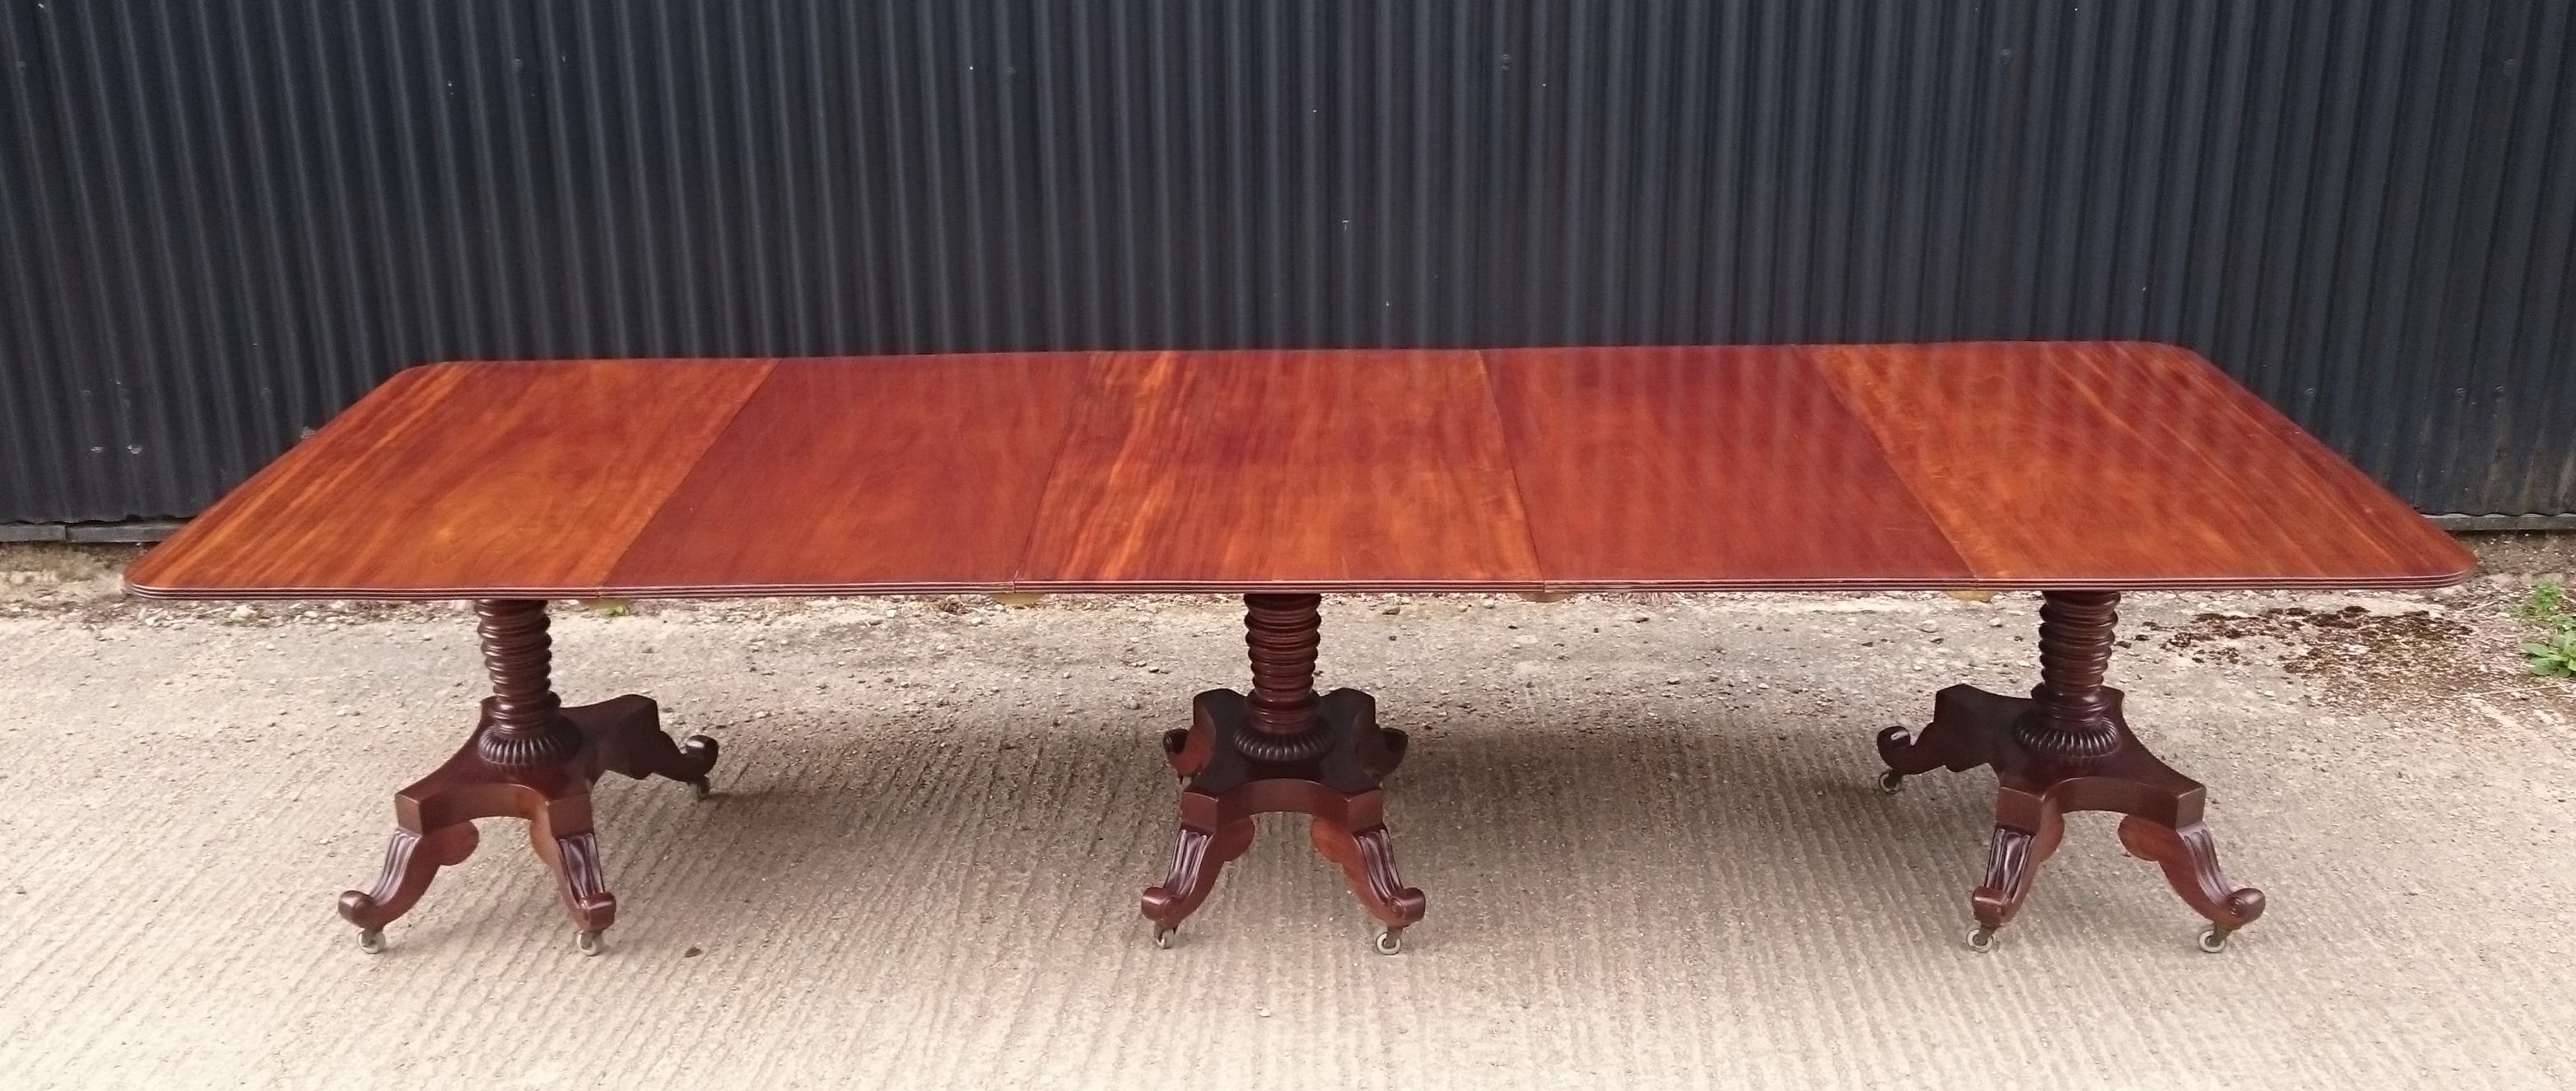 Antique dining table dating from circa 1825, this George IV period mahogany antique dining table is supported by three pedestals, each with four splay legs and it has two removable leaves to adjust the length of the table to suit the number of